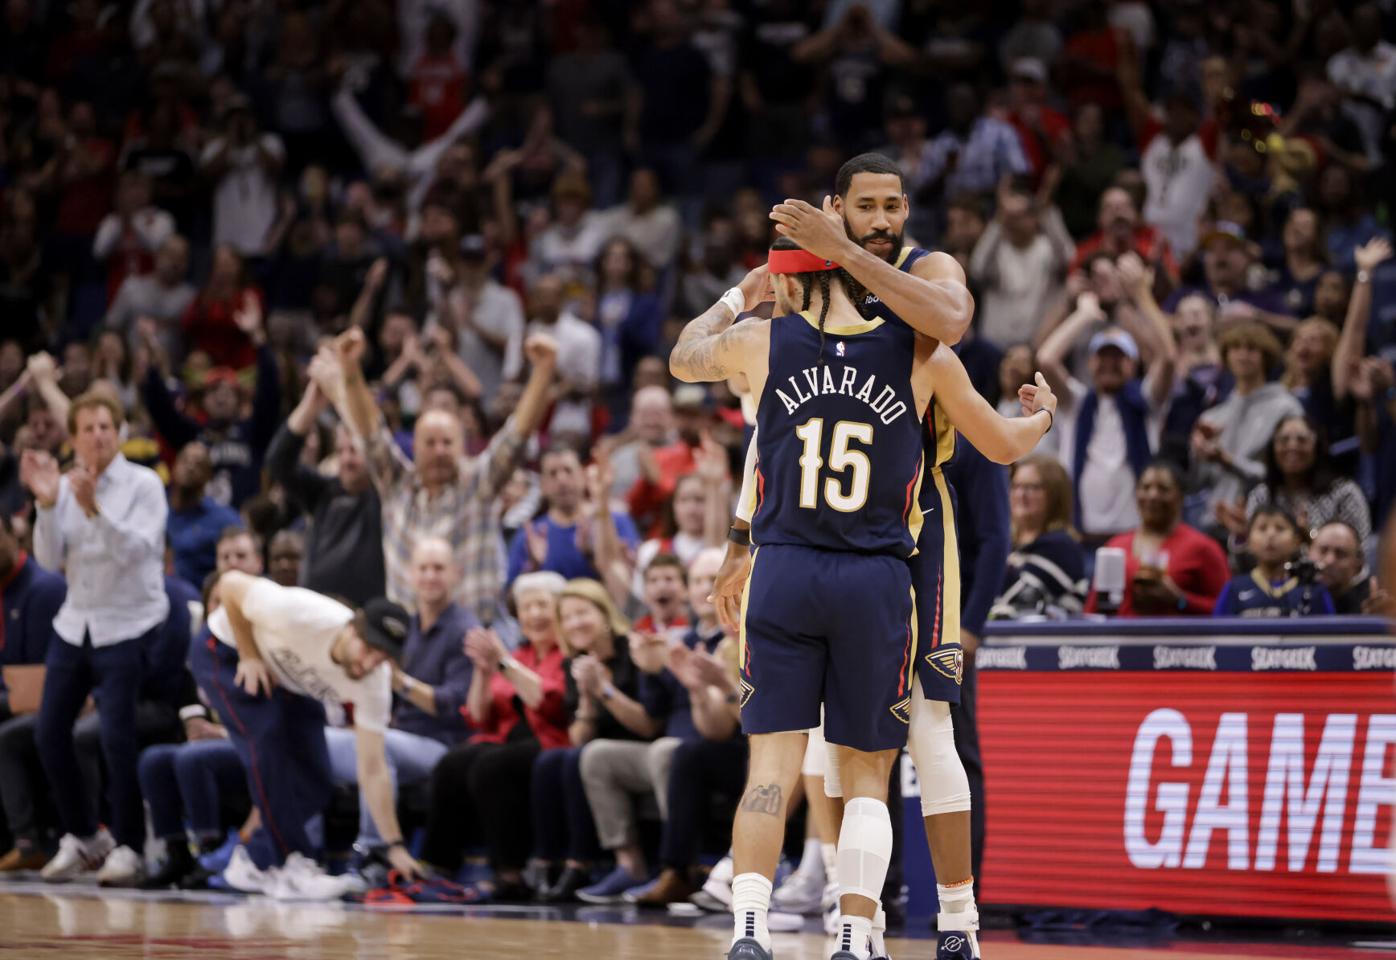 Smoothie King - The NBA Playoffs come to the Smoothie King Center tonight!  Grab your smoothie and fuel up to cheer the Pelicans to victory. We are  proud to be the official